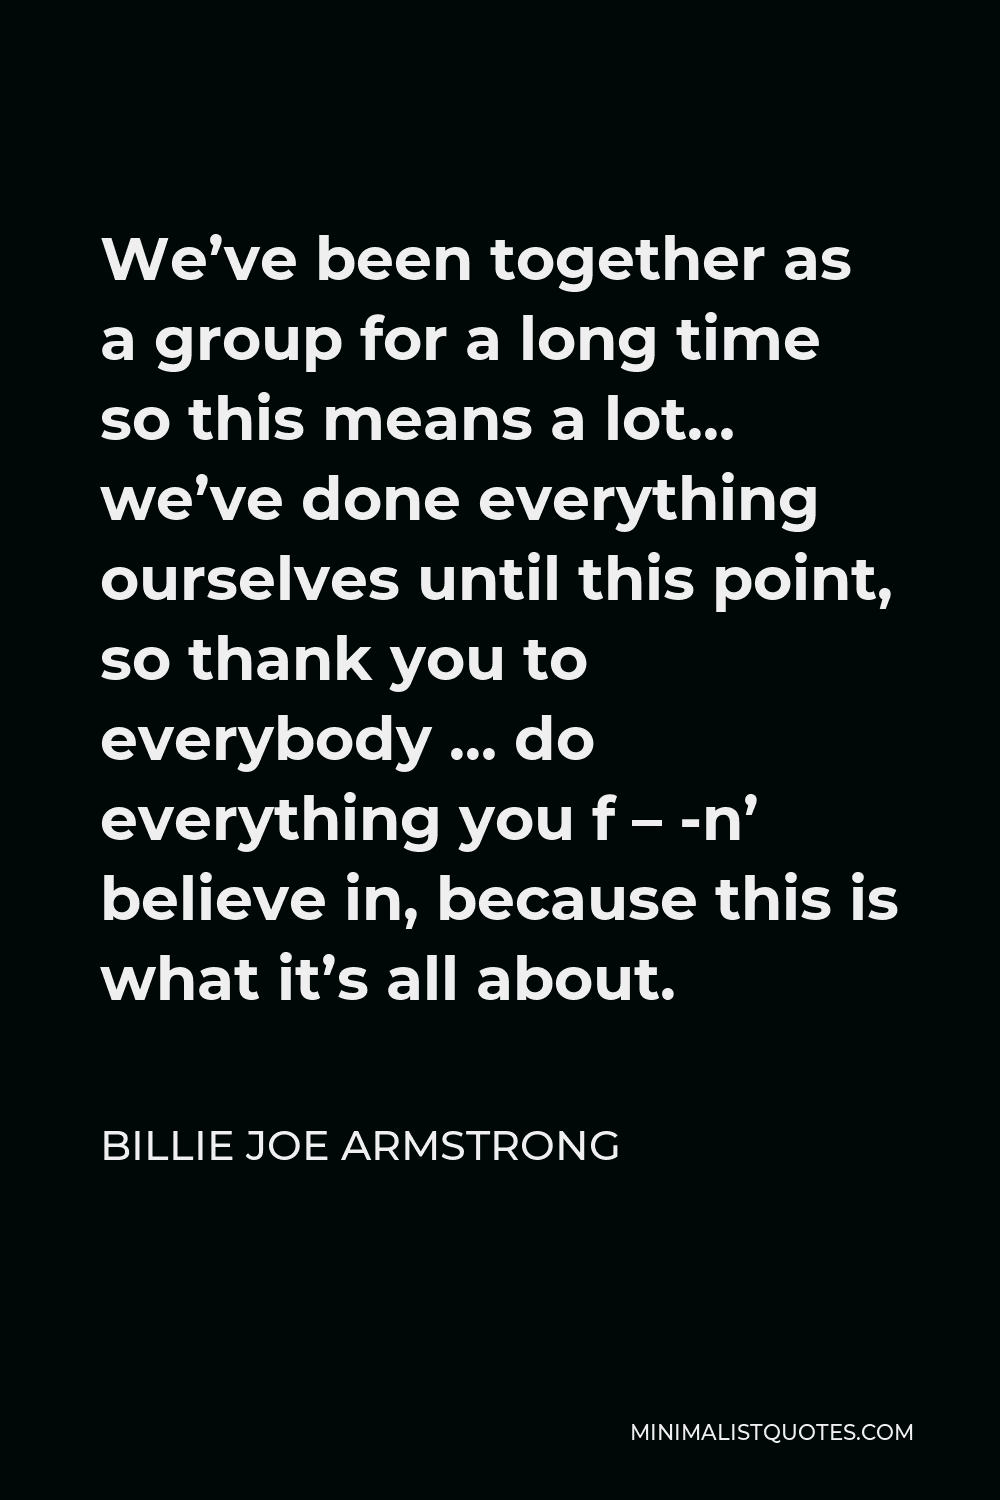 Billie Joe Armstrong Quote - We’ve been together as a group for a long time so this means a lot… we’ve done everything ourselves until this point, so thank you to everybody … do everything you f – -n’ believe in, because this is what it’s all about.